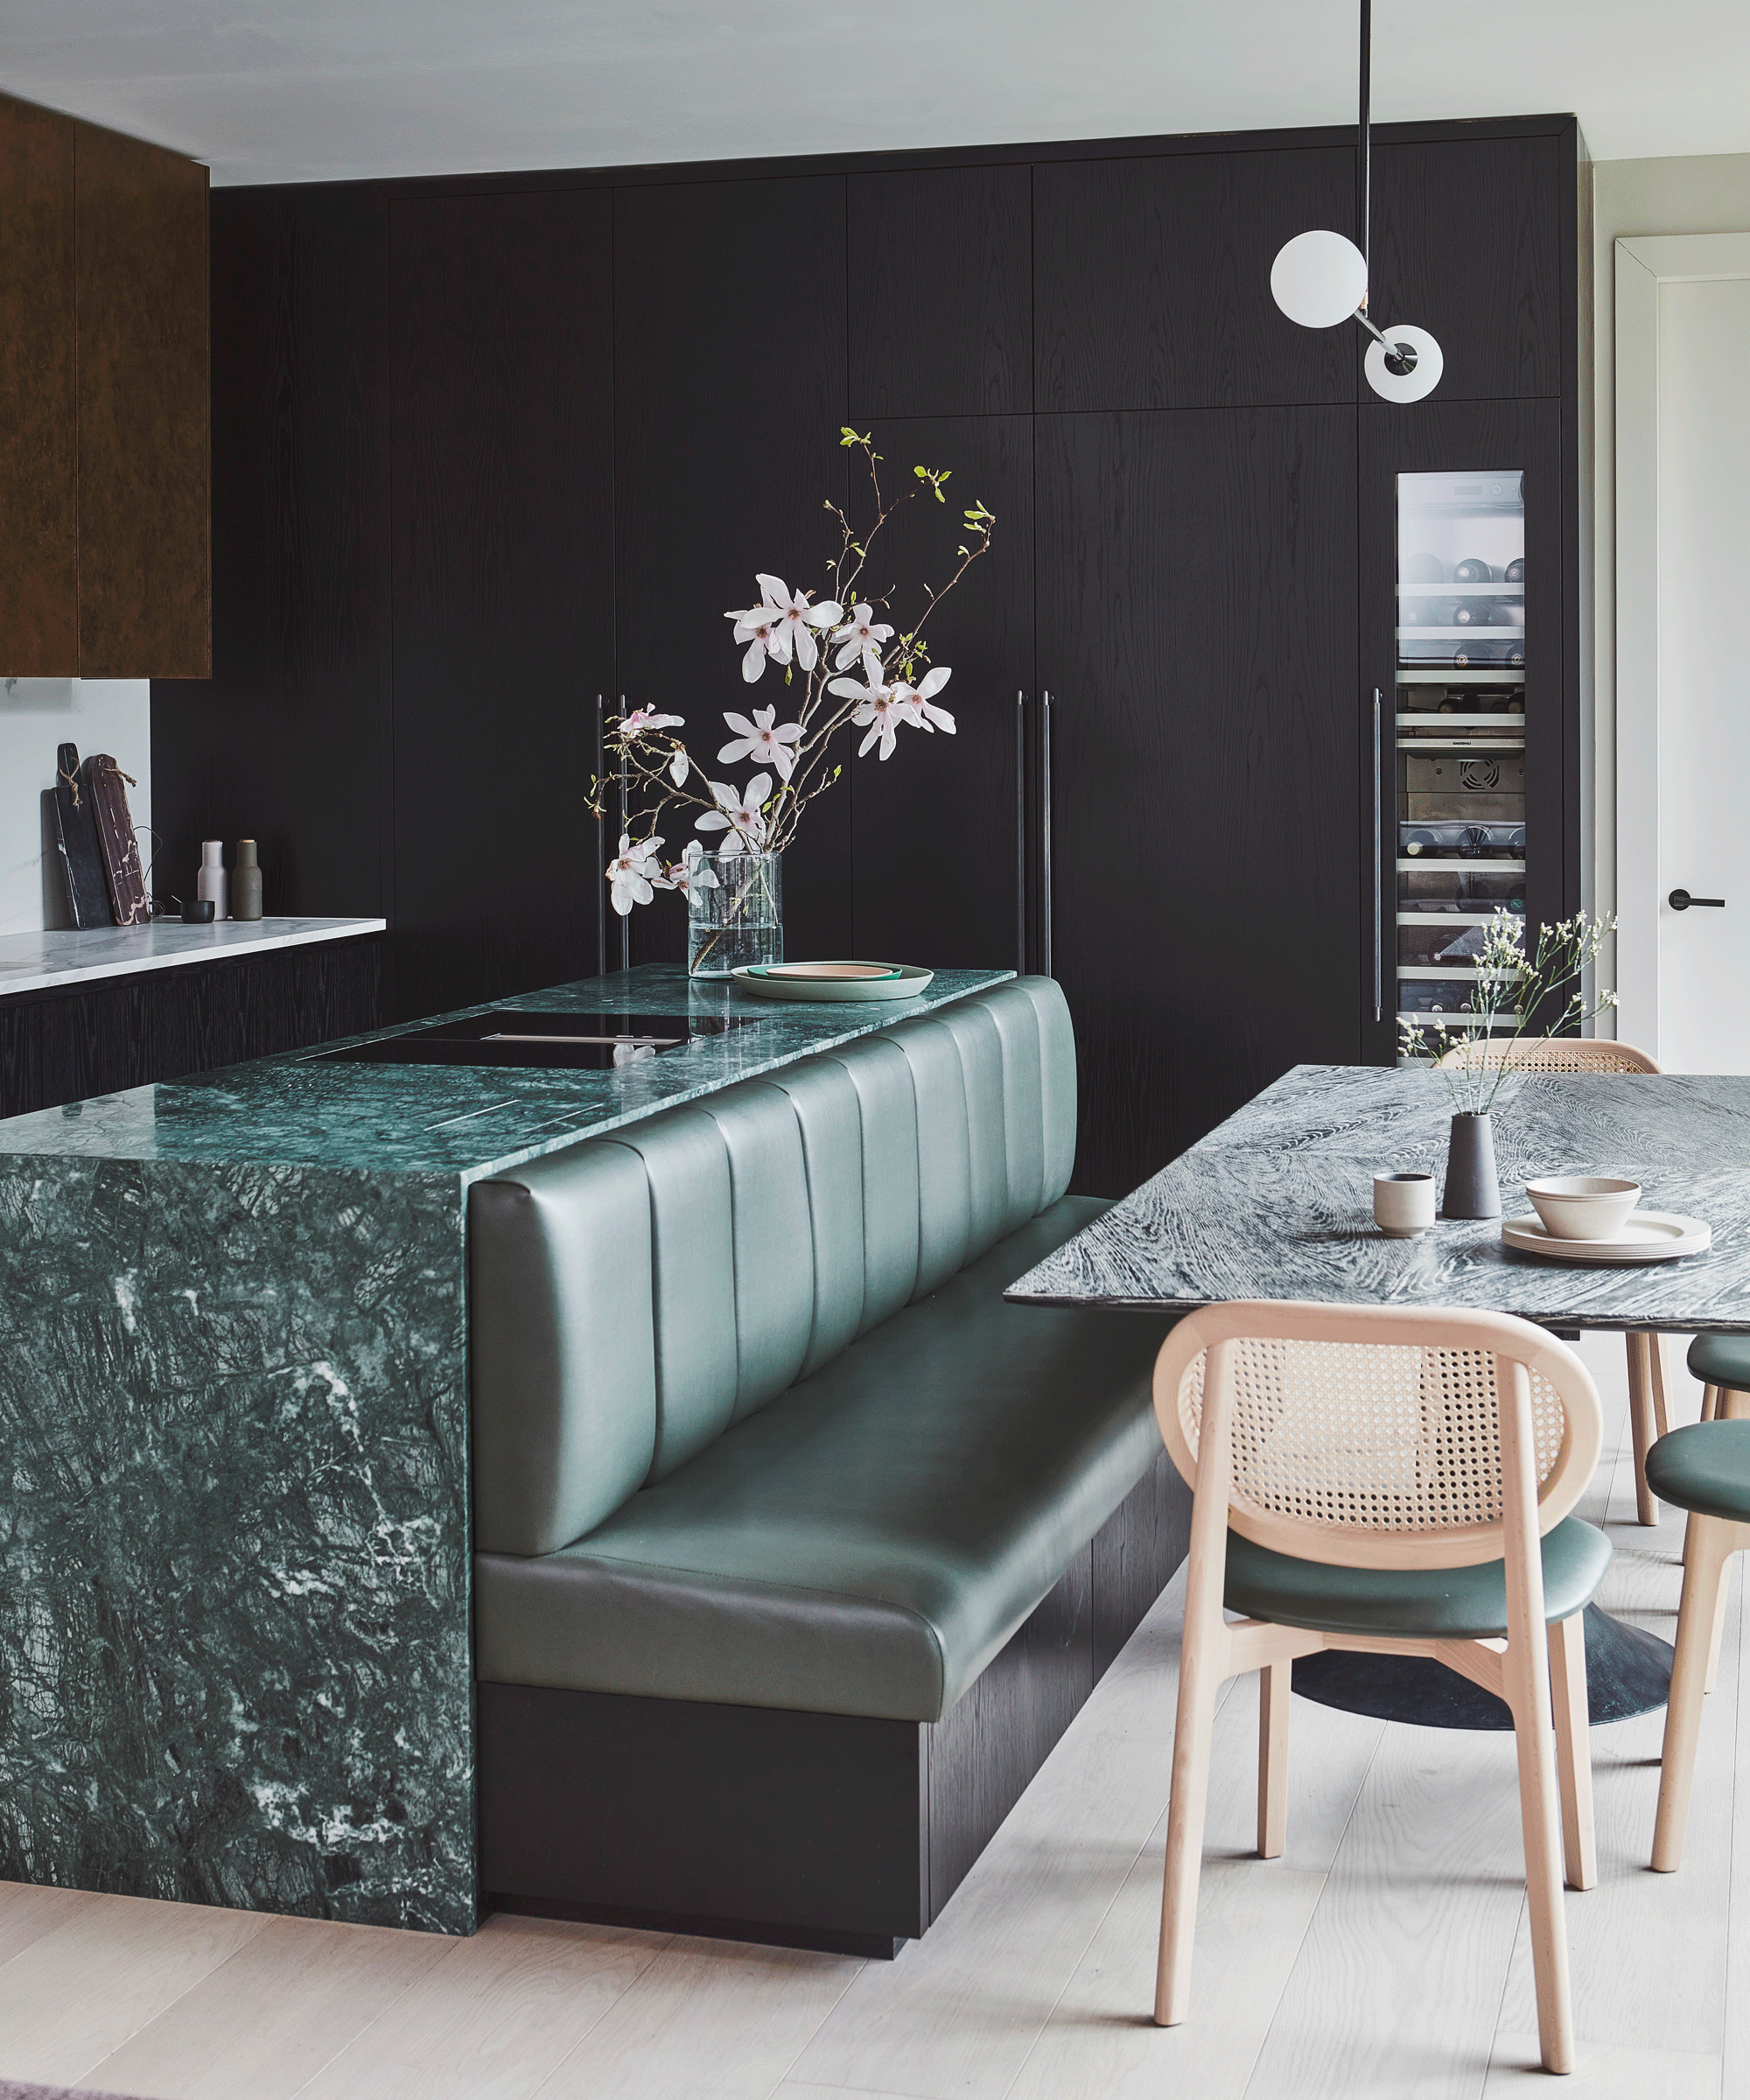 Green marble kitchen island with green leather banquette